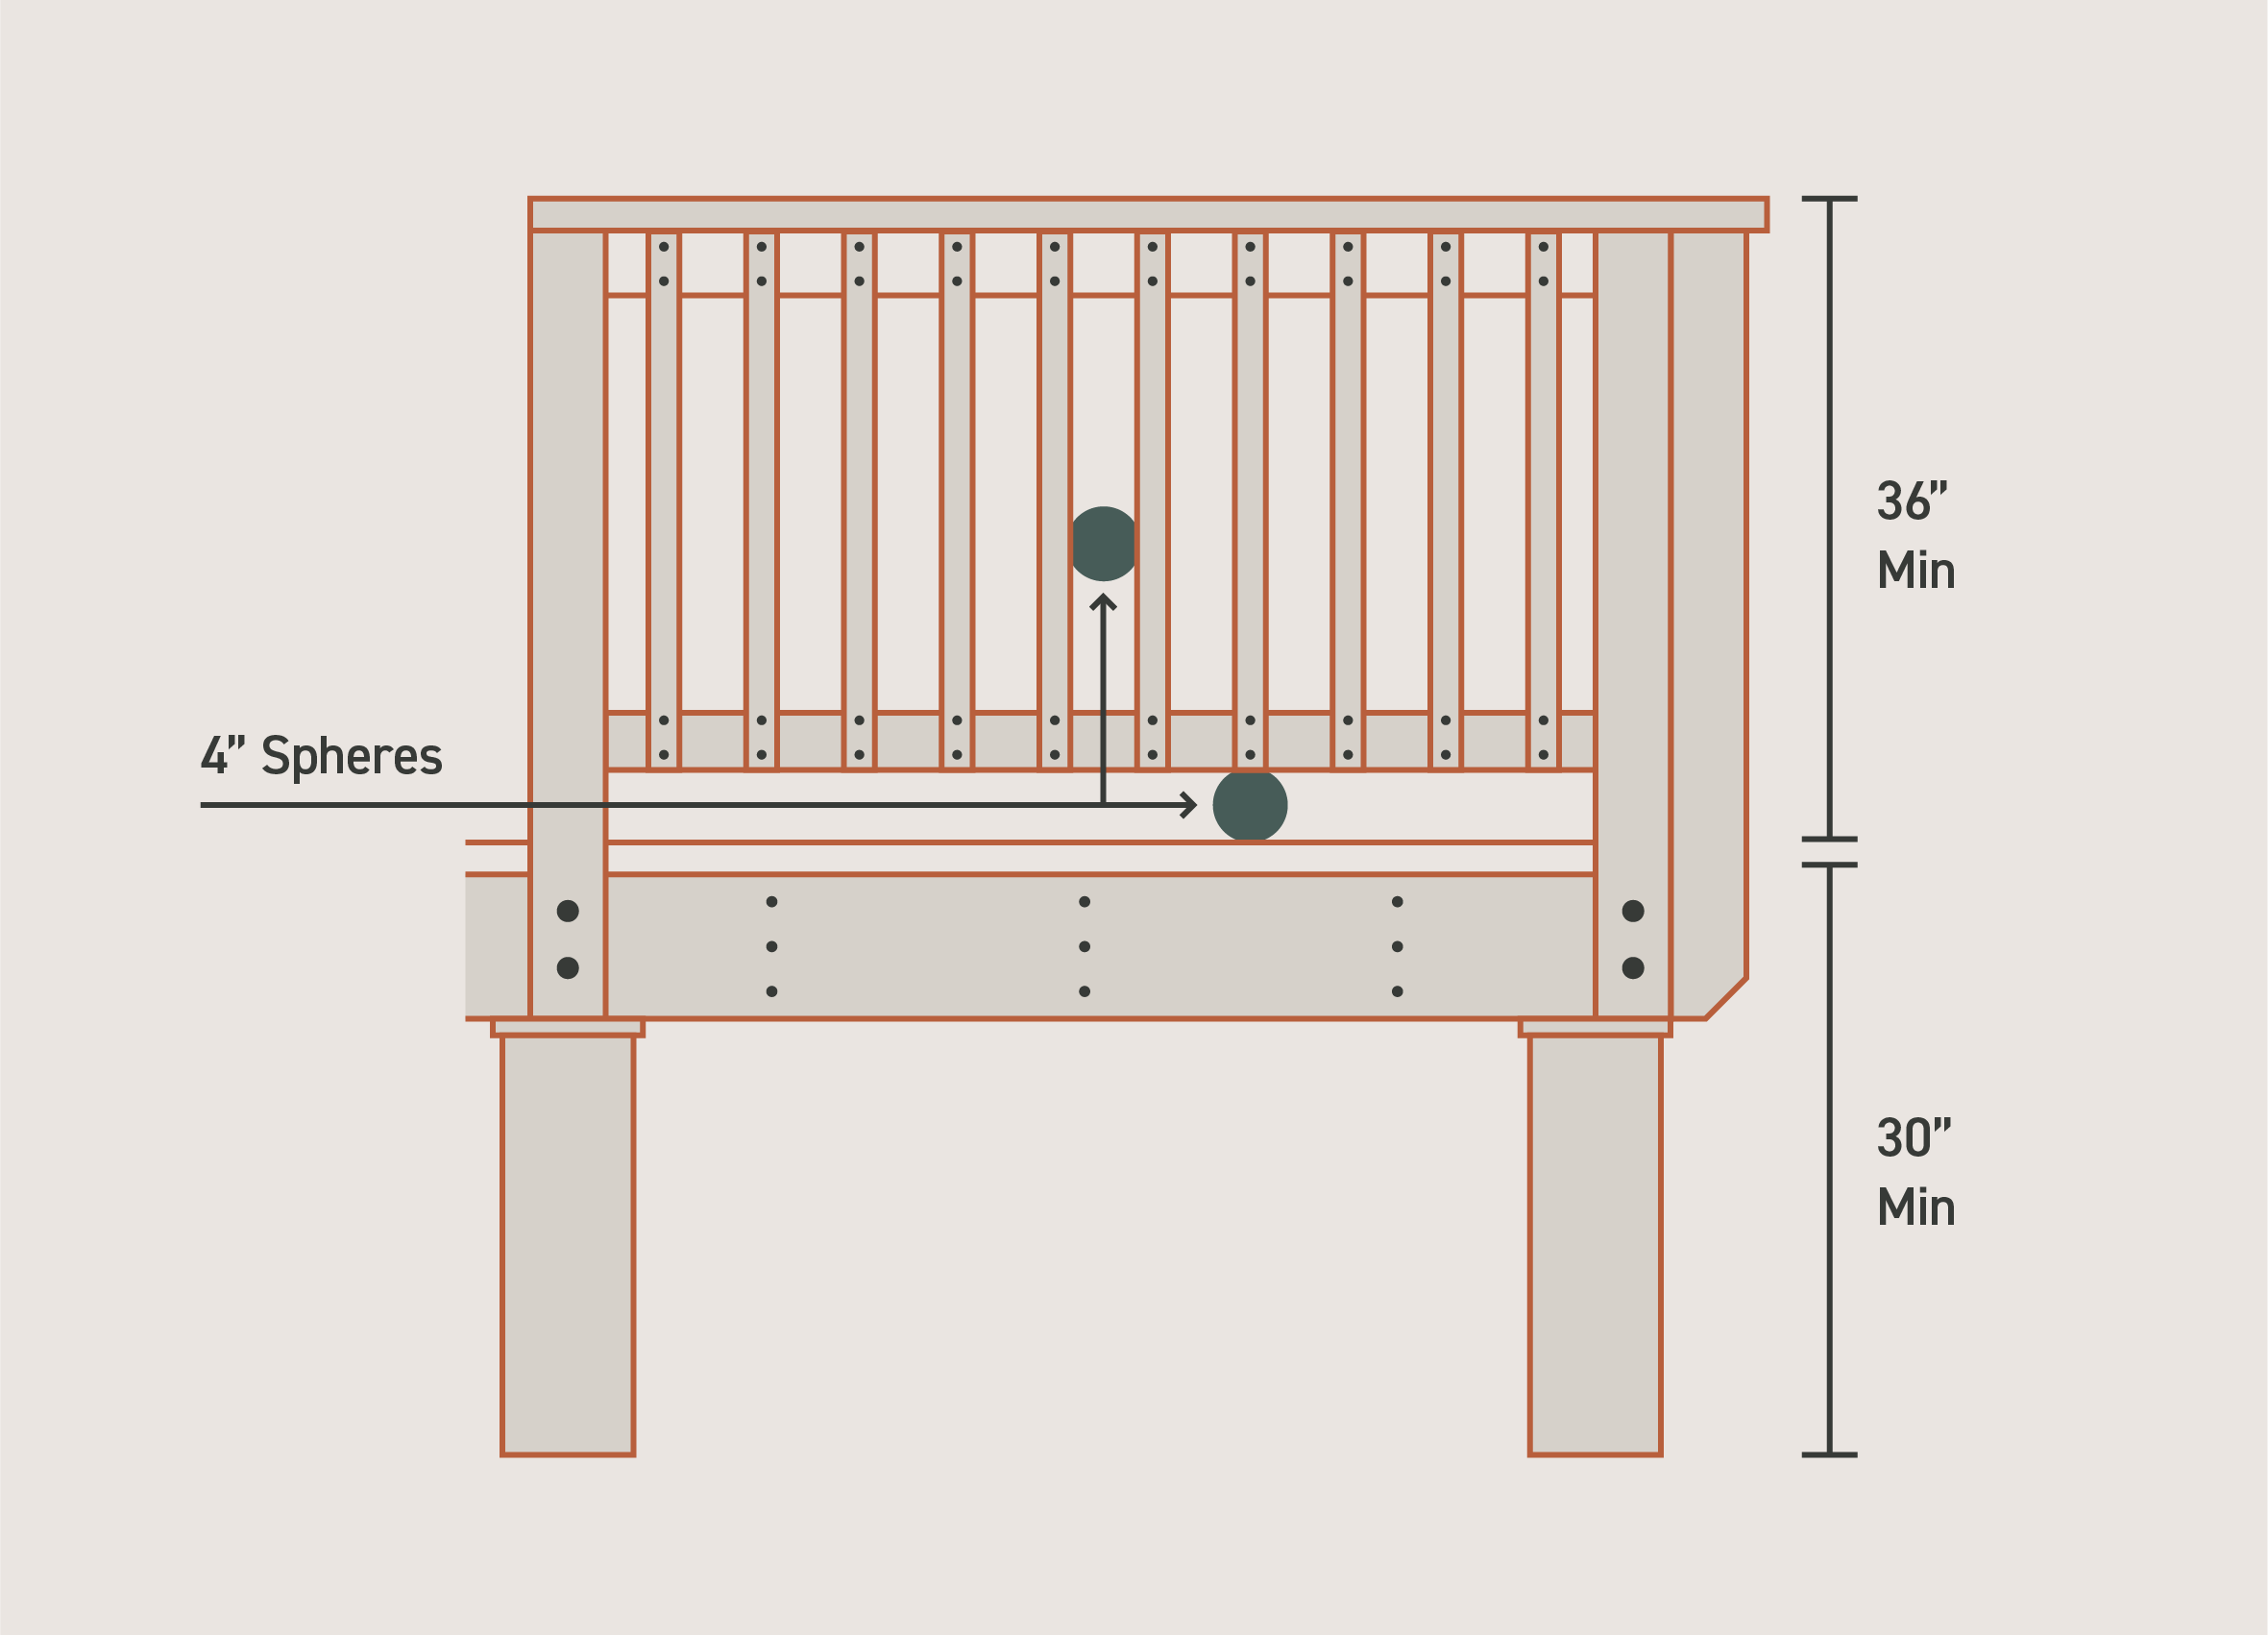 A diagram highlights important deck railing codes including railing height minimums, baluster spacing, and more.